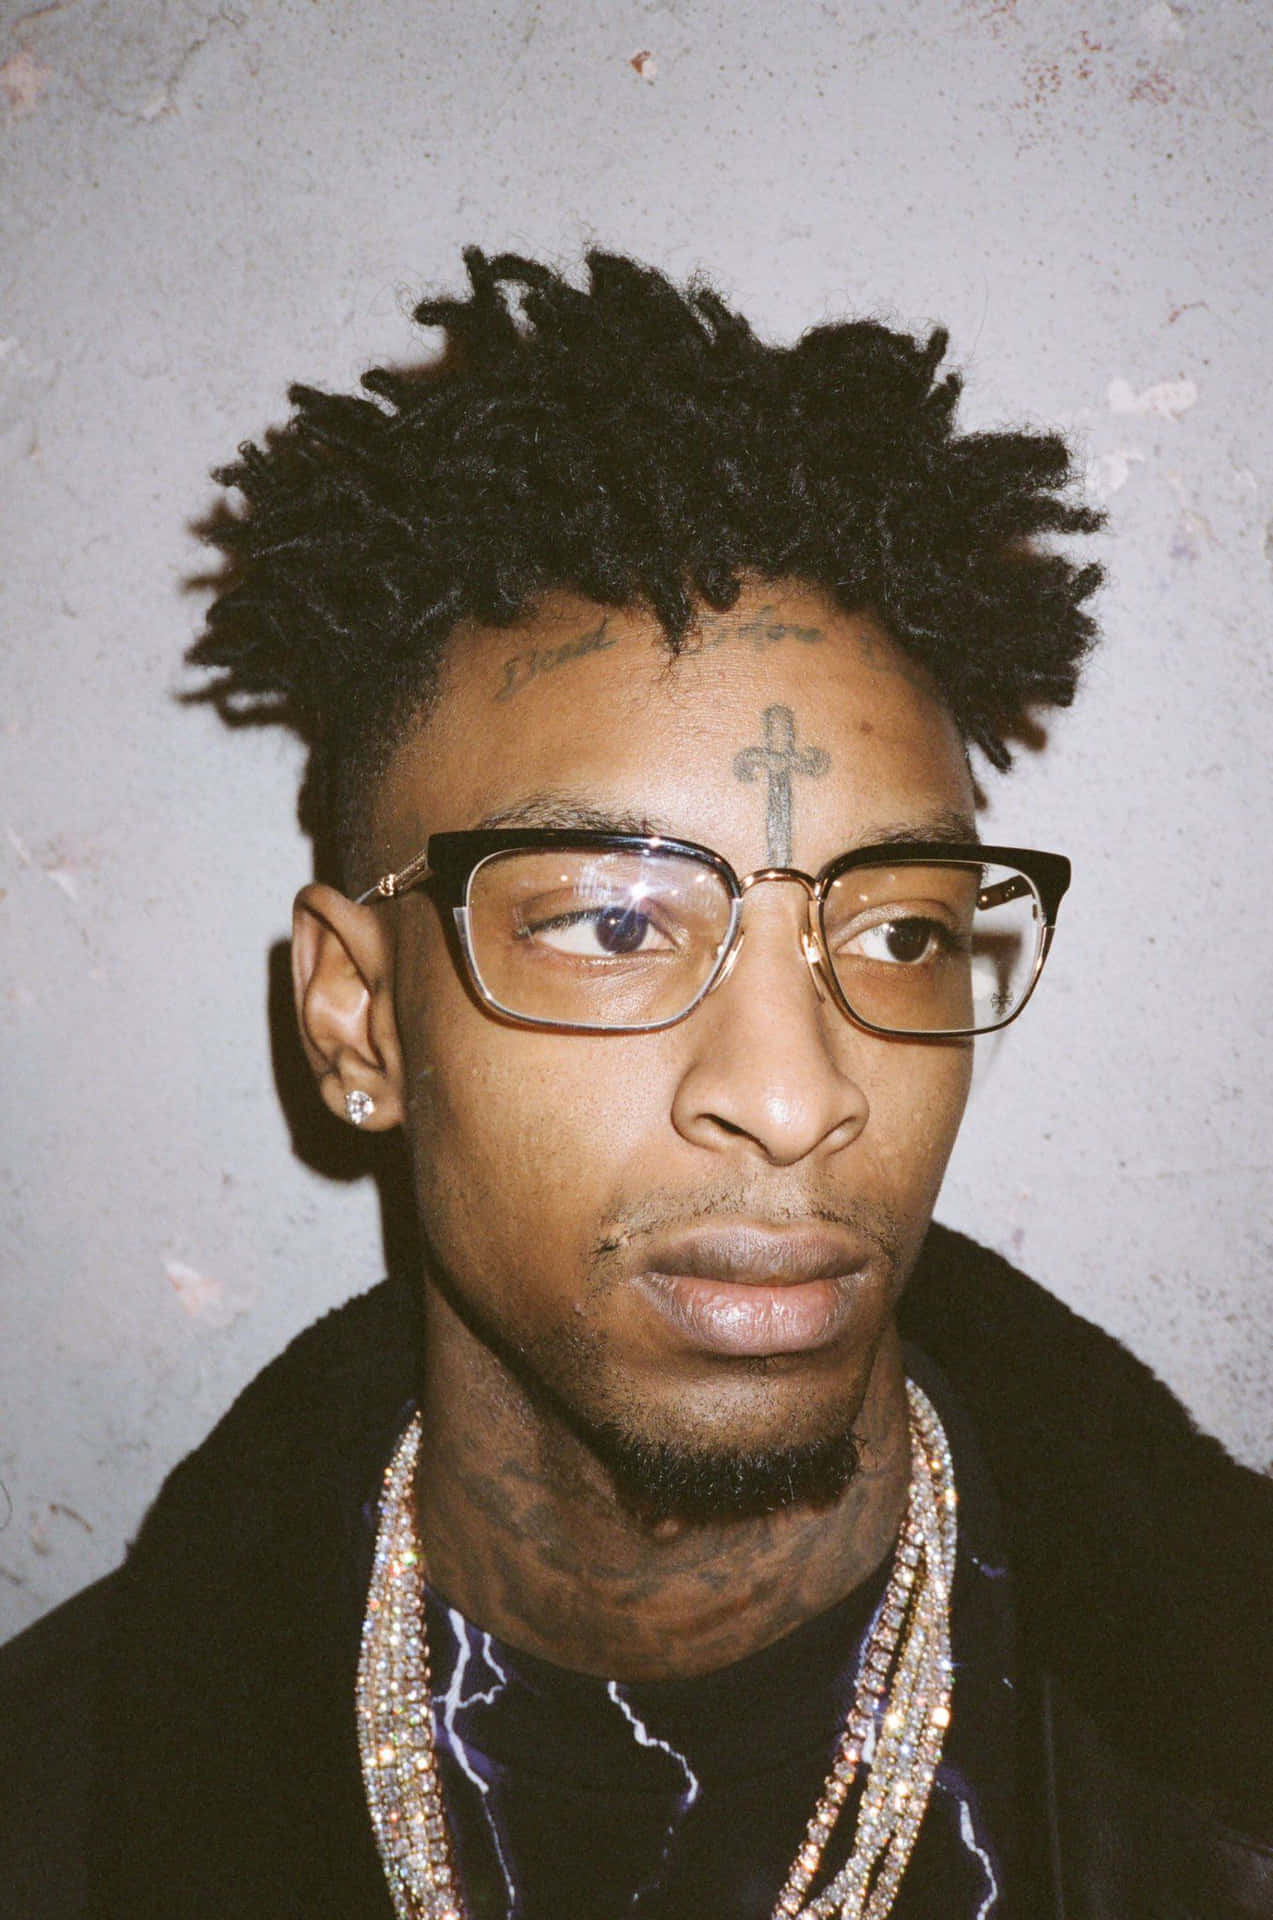 Rappere Compositor 21 Savage